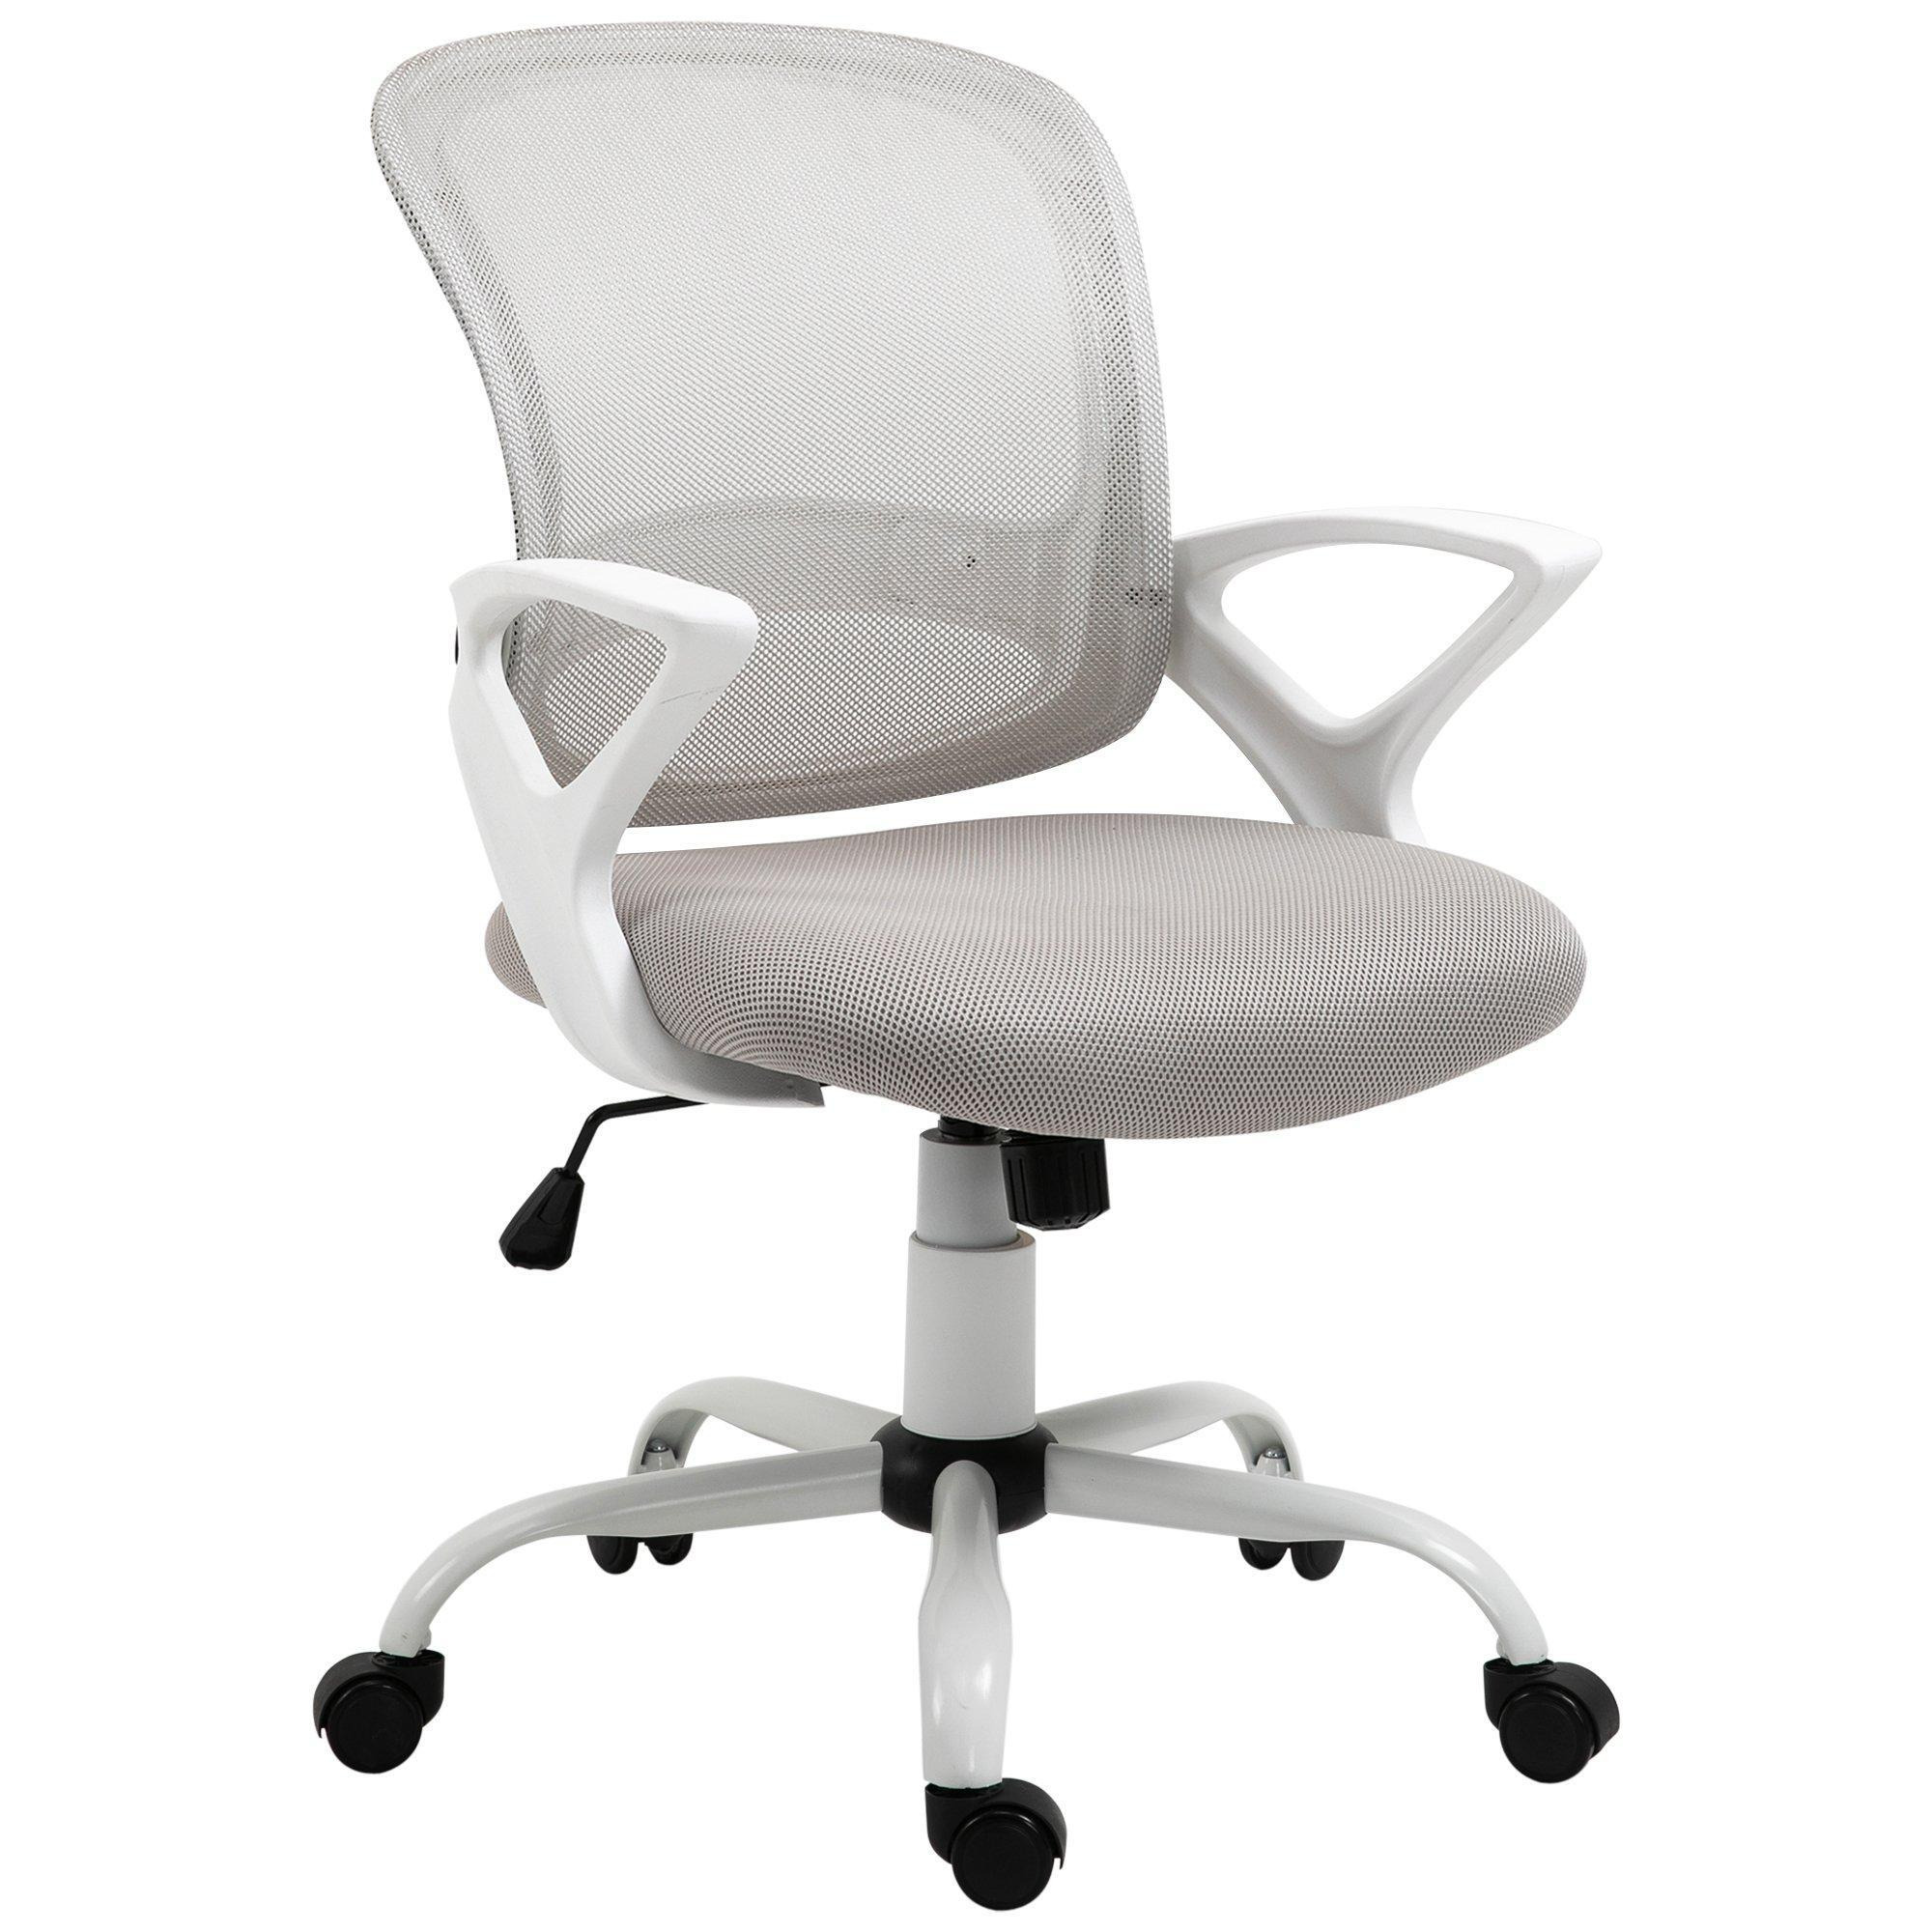 Mesh Office Chair Swivel Desk Task Computer Chair with Back Support - image 1